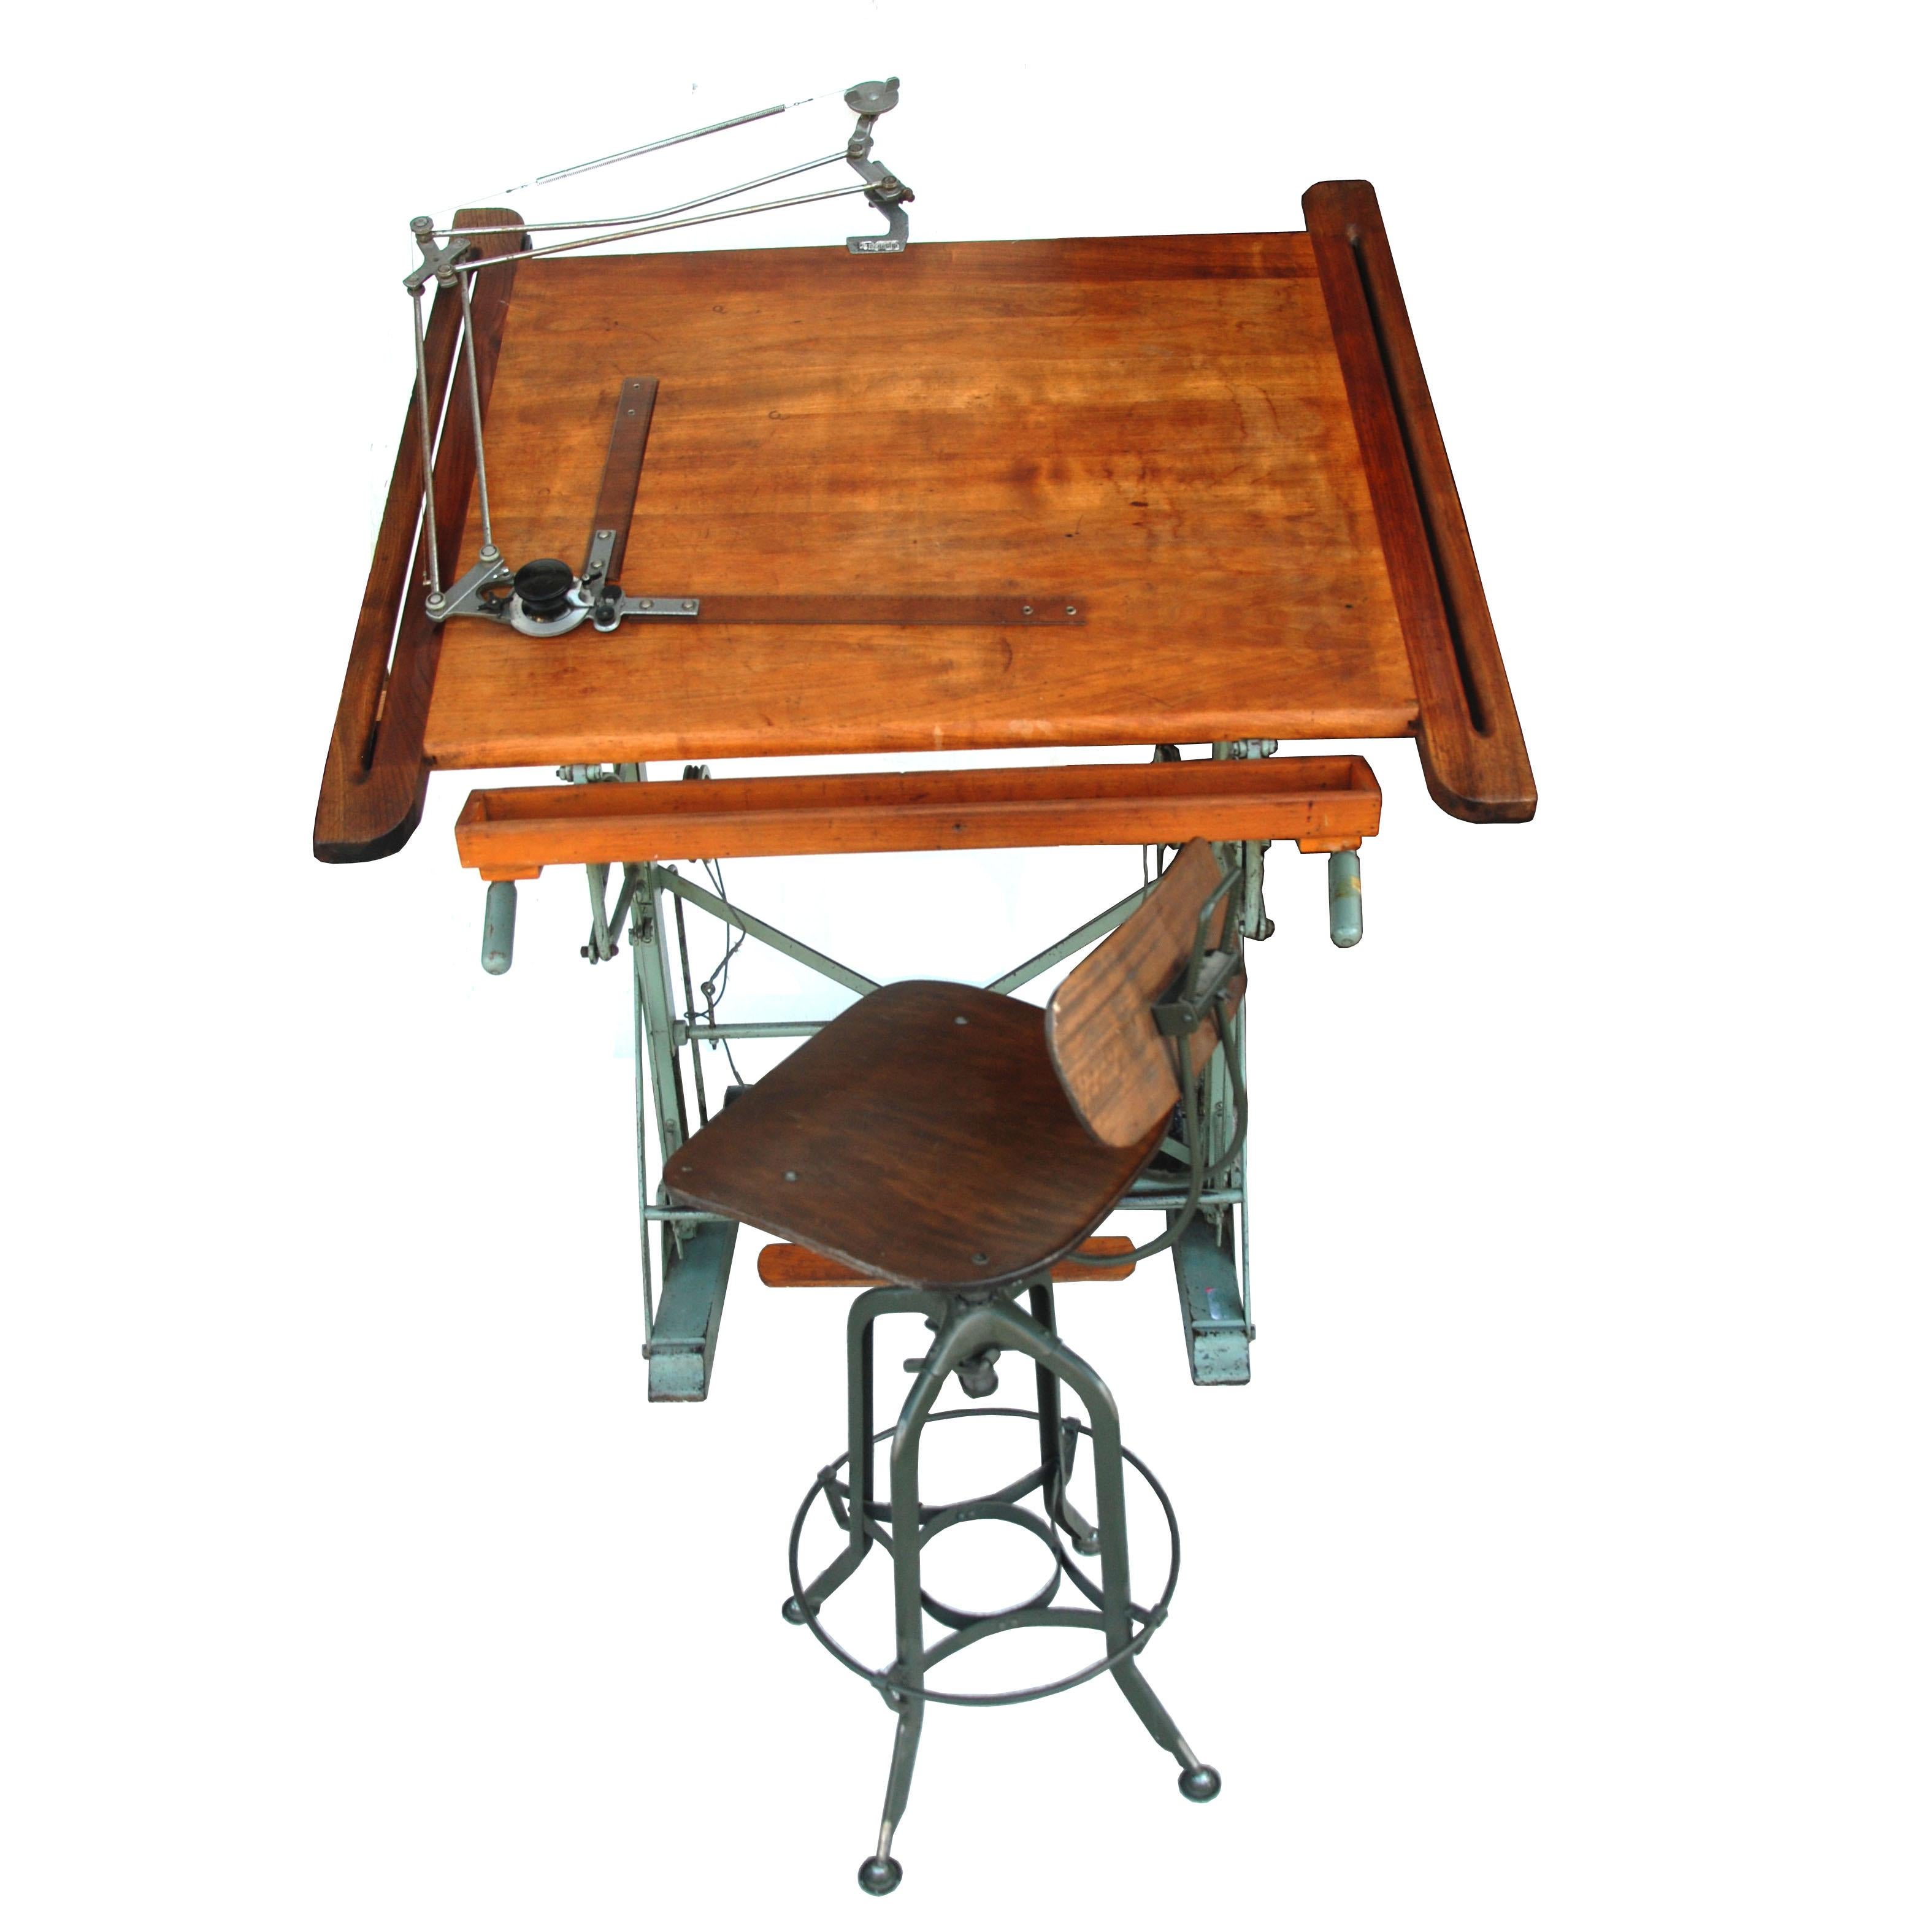 Attributed to Kahn Freres, 1900s. 

Rare antique French adjustable industrial drafting table. Original green metal base and rich patina wood top. Pencil tray. Original weight mechanism at the base.

Drafting tools are included.
Vintage Toledo